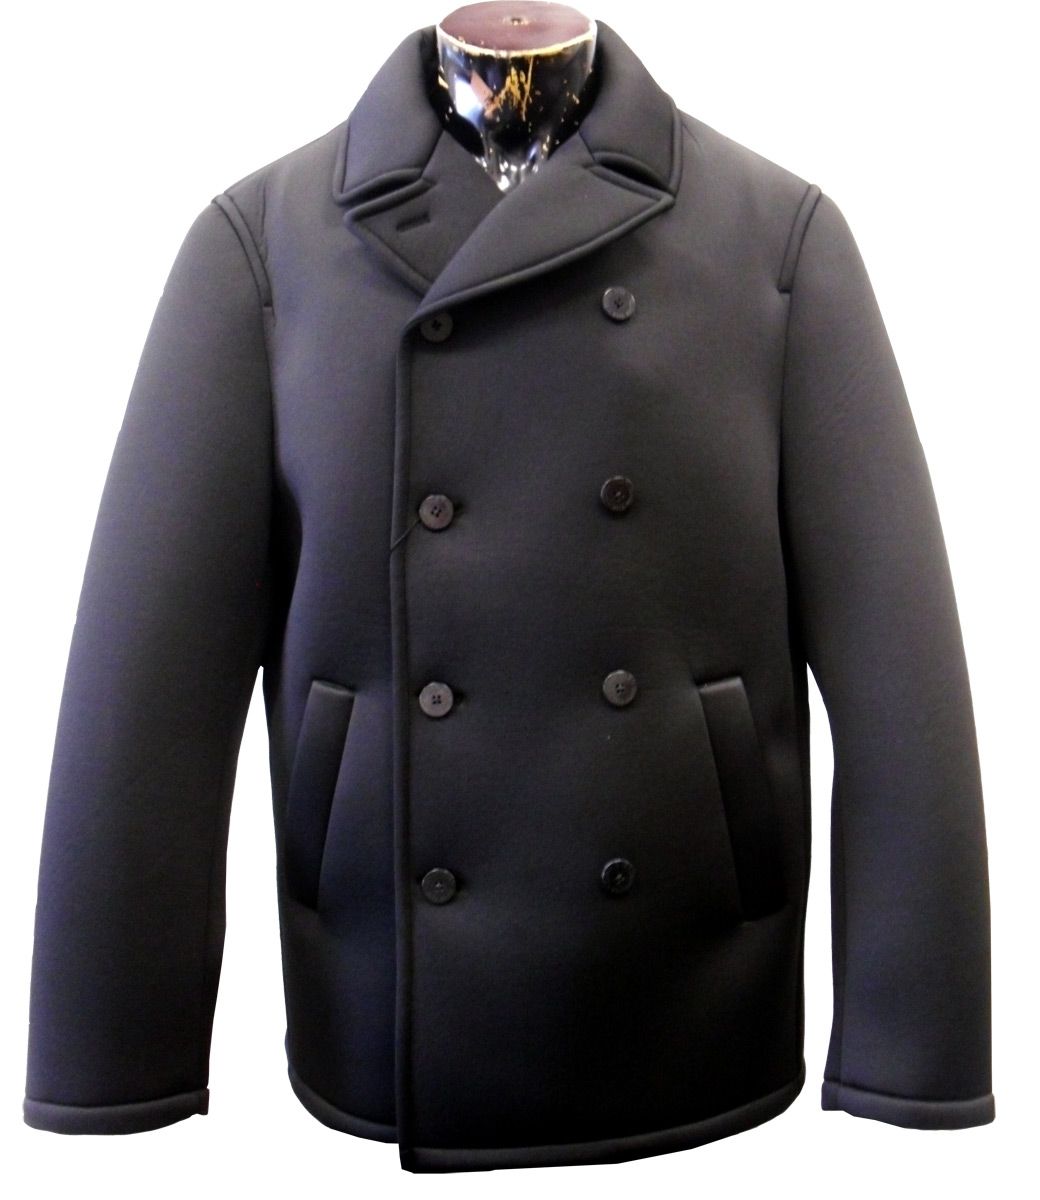 Silversilk Men's Double Breasted Outlet Pea Coat - All Weather 